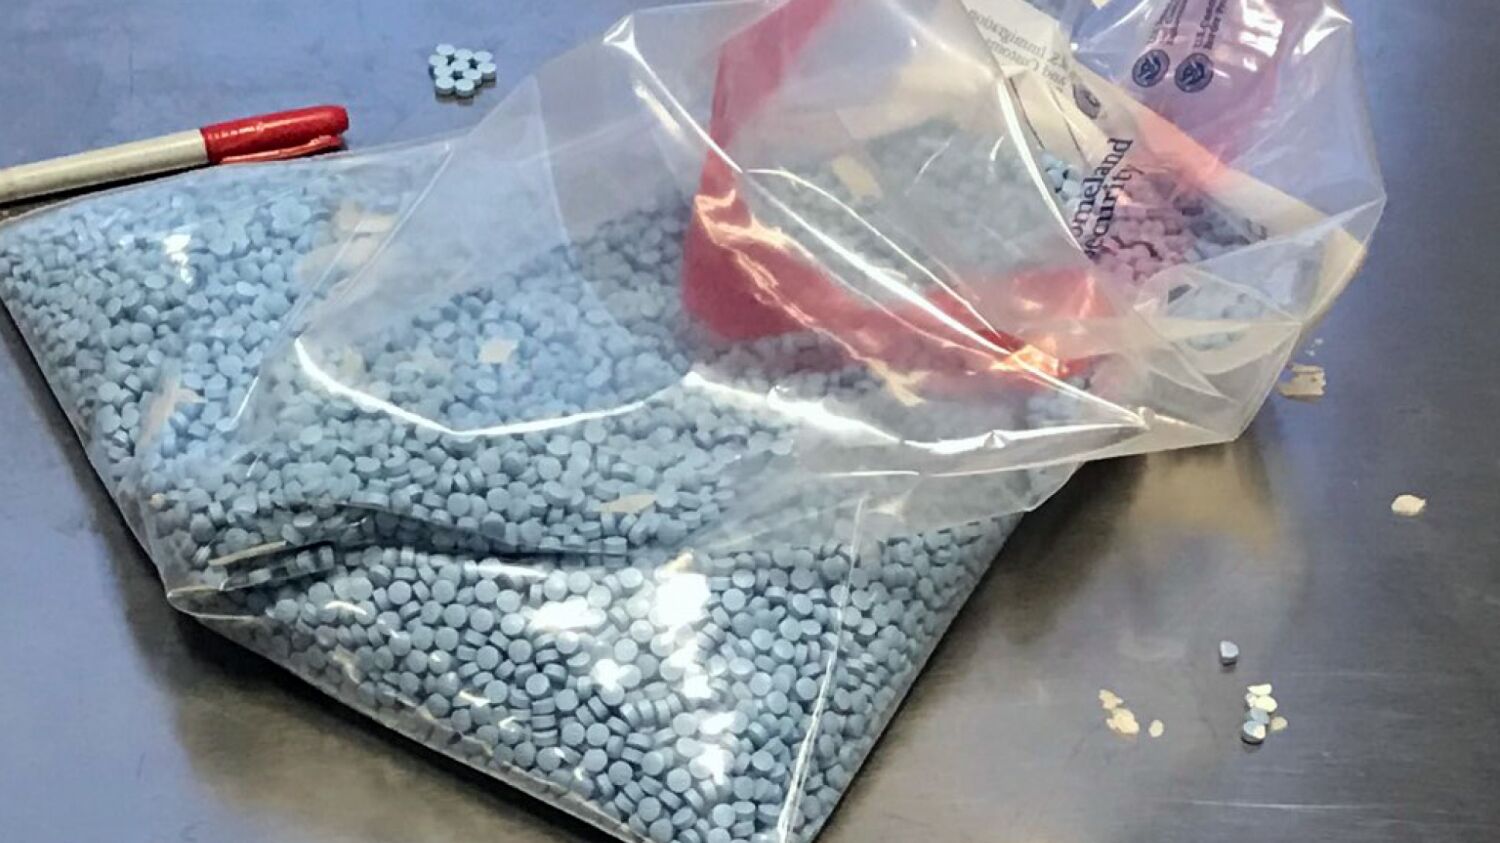 DEA says six out of 10 fake prescription pills analyzed by its labs are found to contain fentanyl